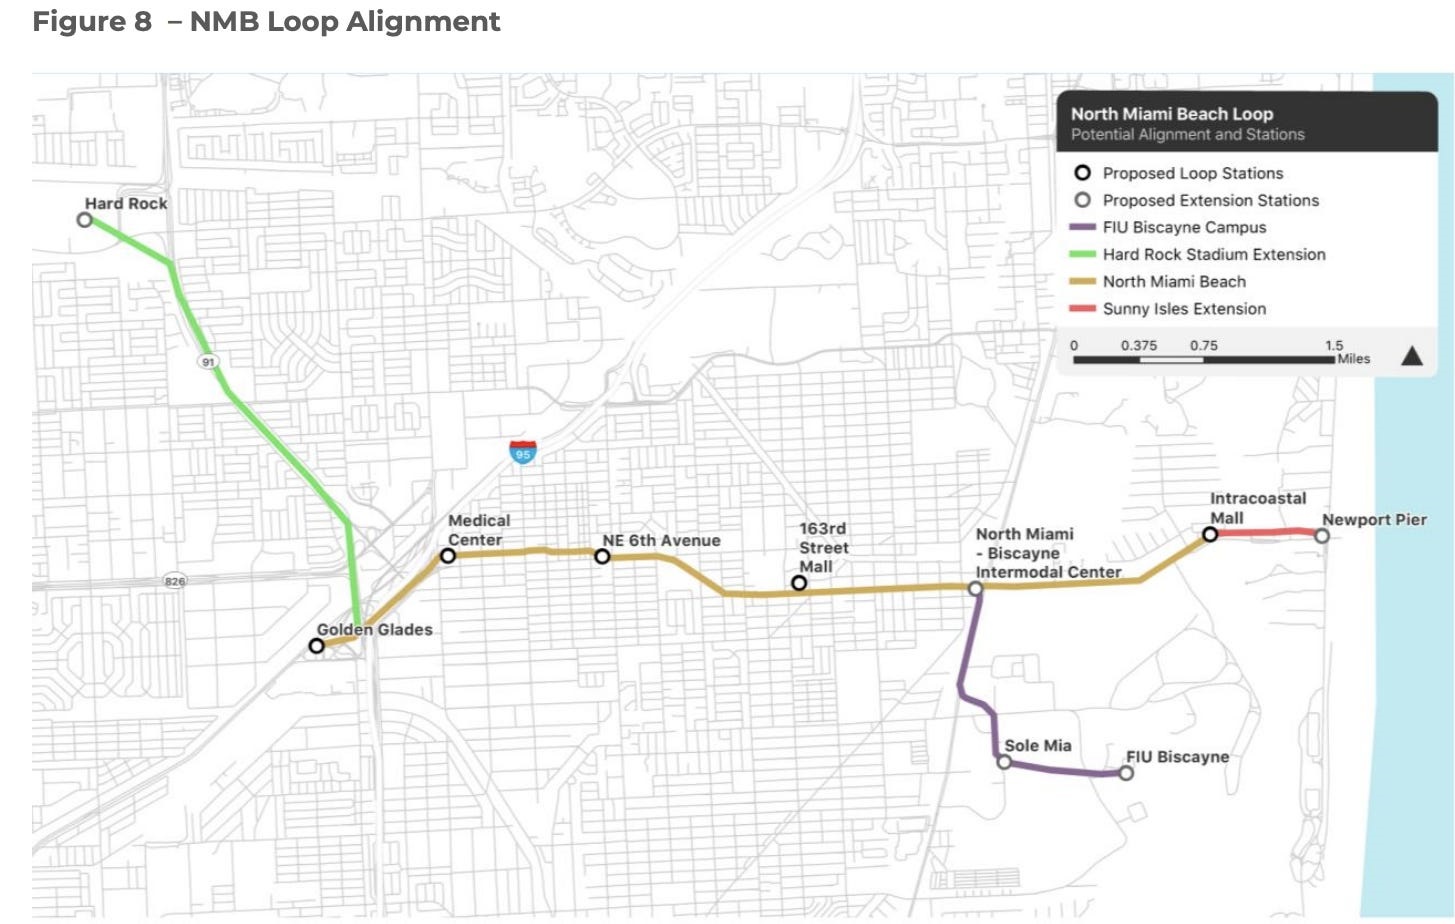 The Boring Company's proposal calls for the North Miami Beach Loop line.